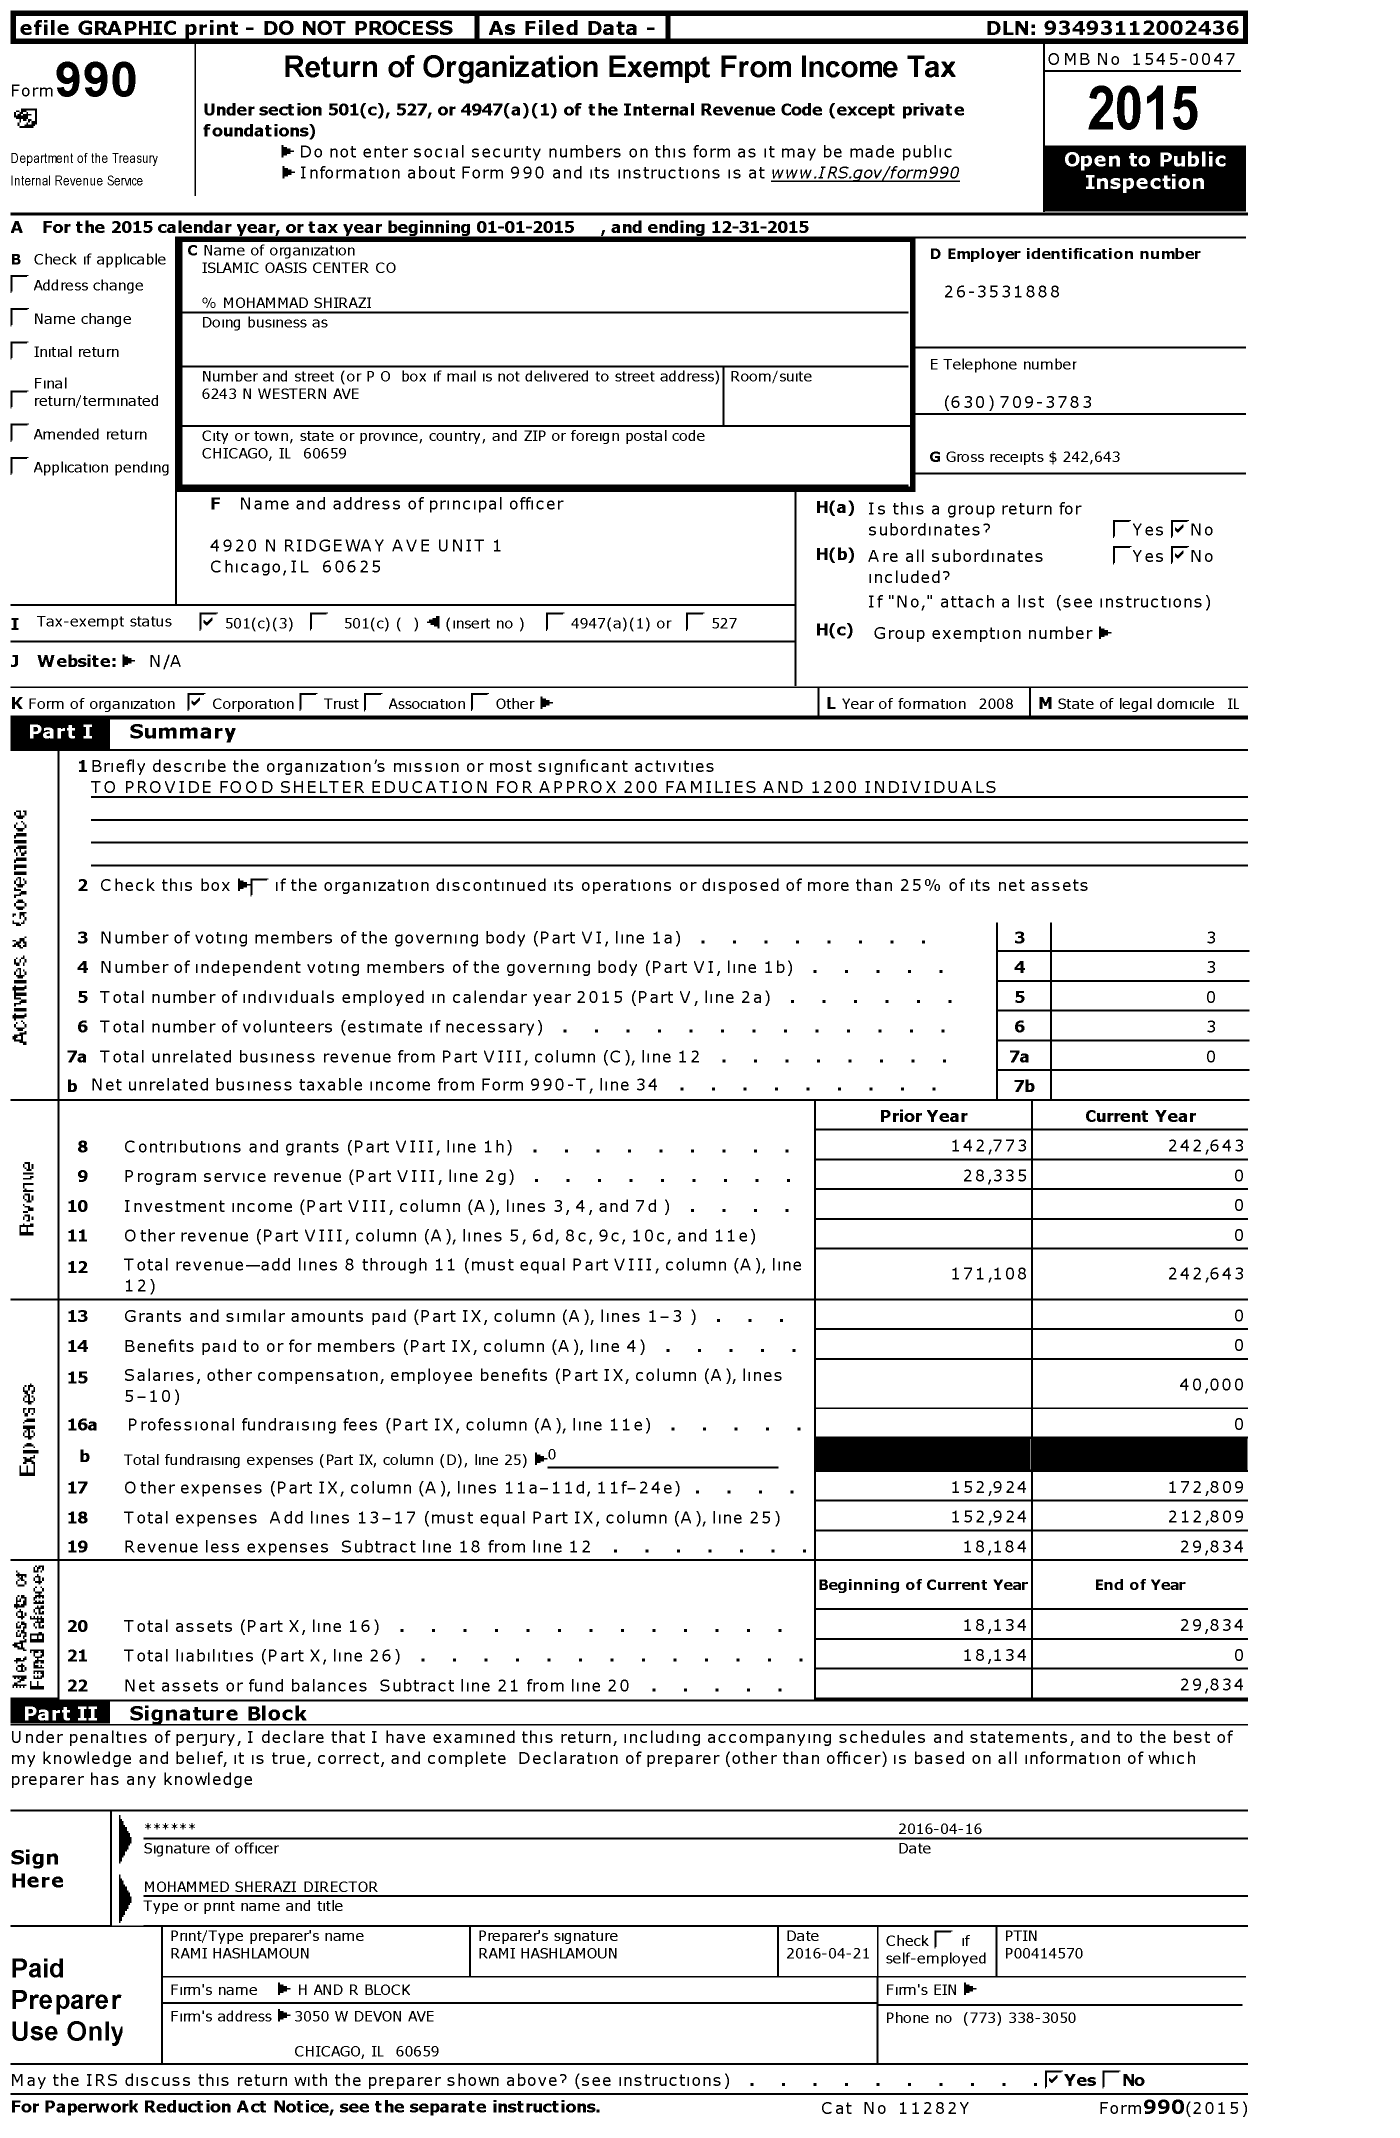 Image of first page of 2015 Form 990 for Islamic Oasis